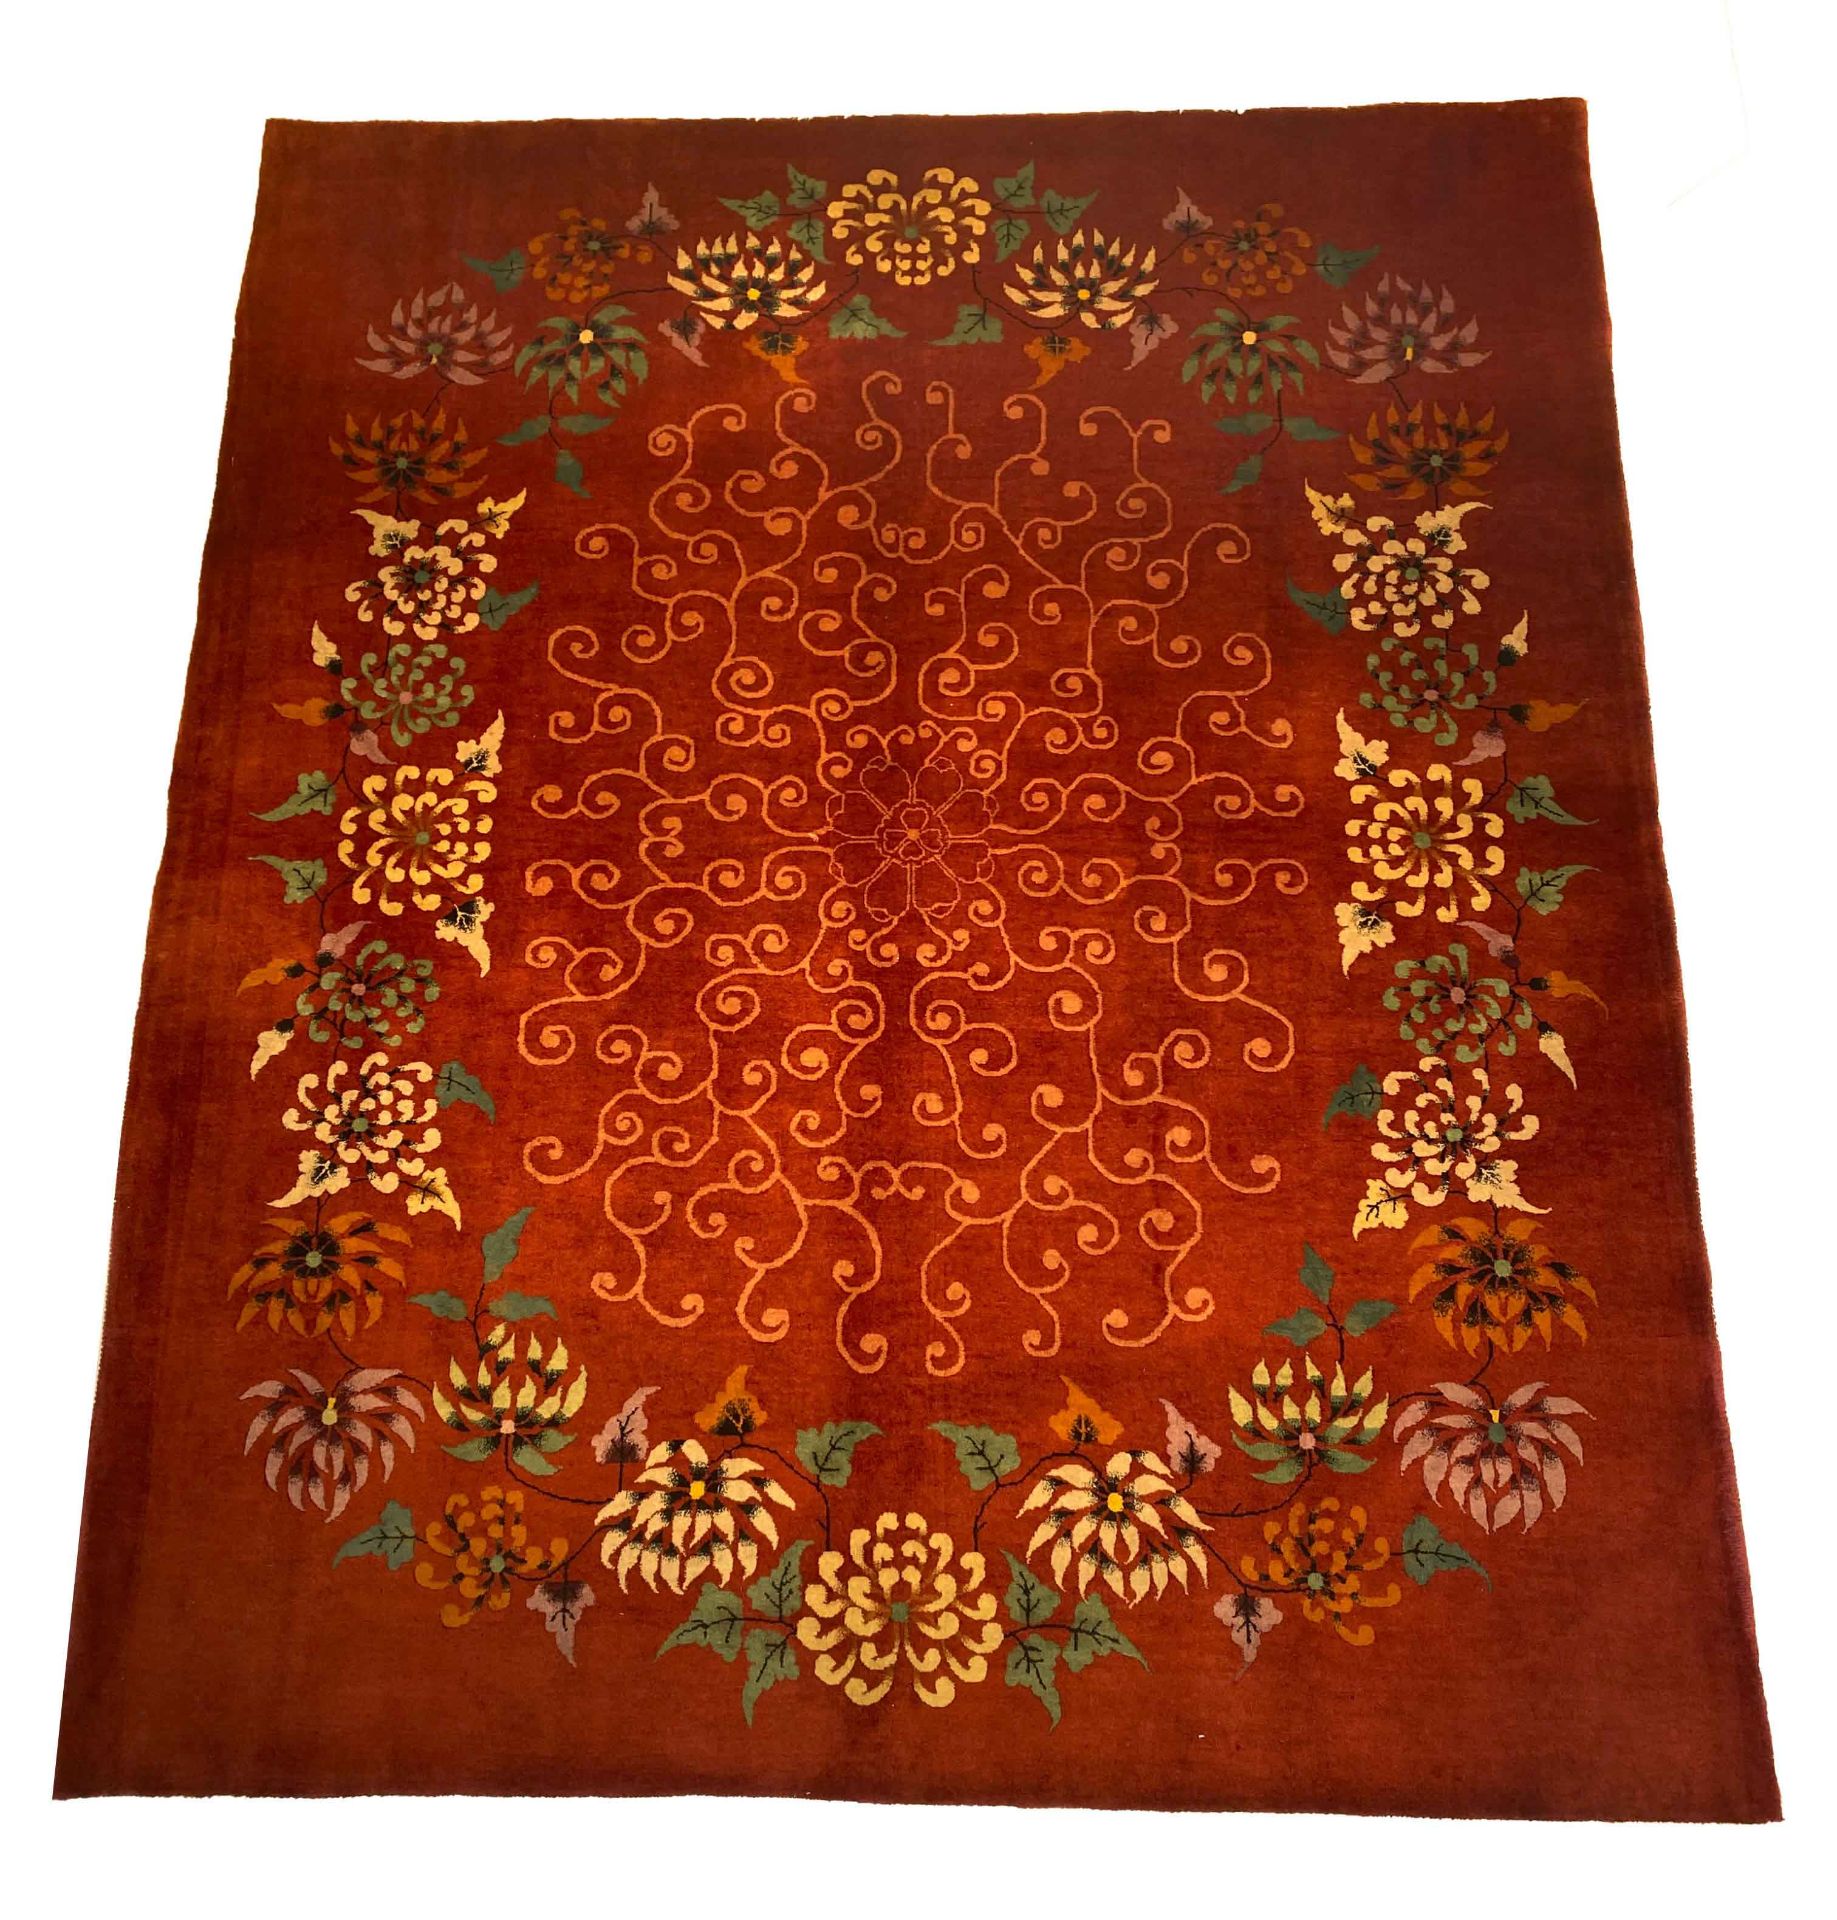 Rug, China, good condition, 290 x 245 cm - The rug can only be viewed and collected at another